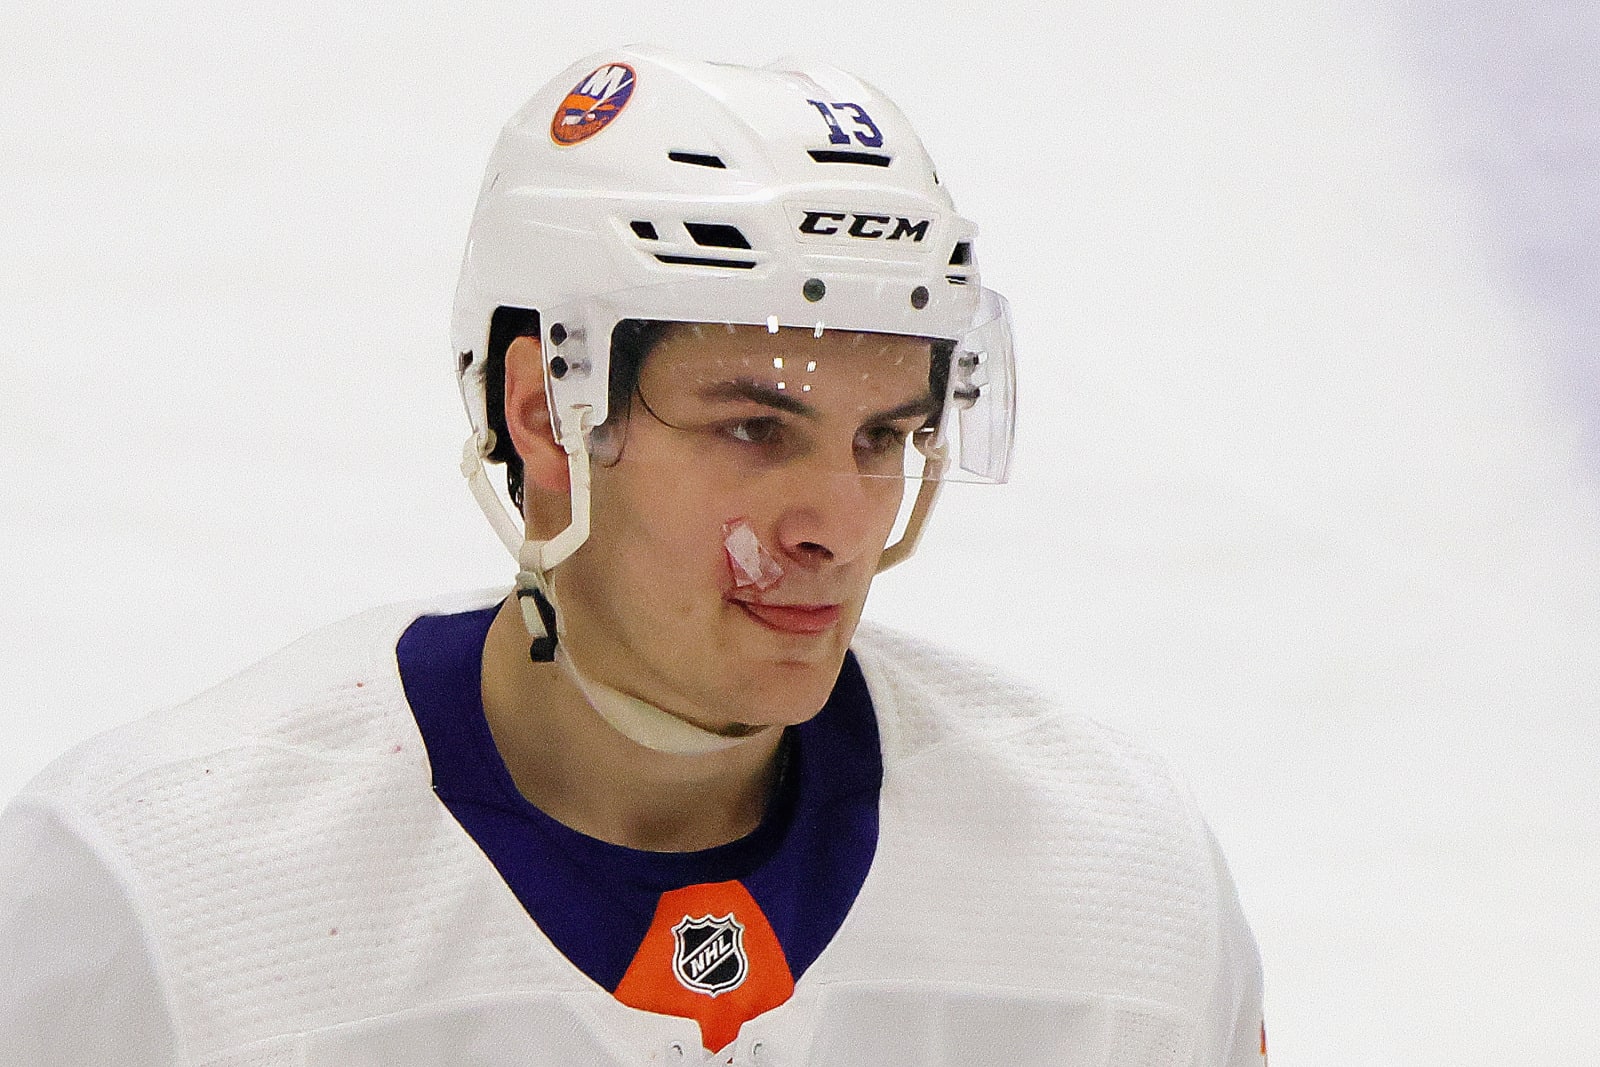 What will Mathew Barzal's next contract look like for Islanders